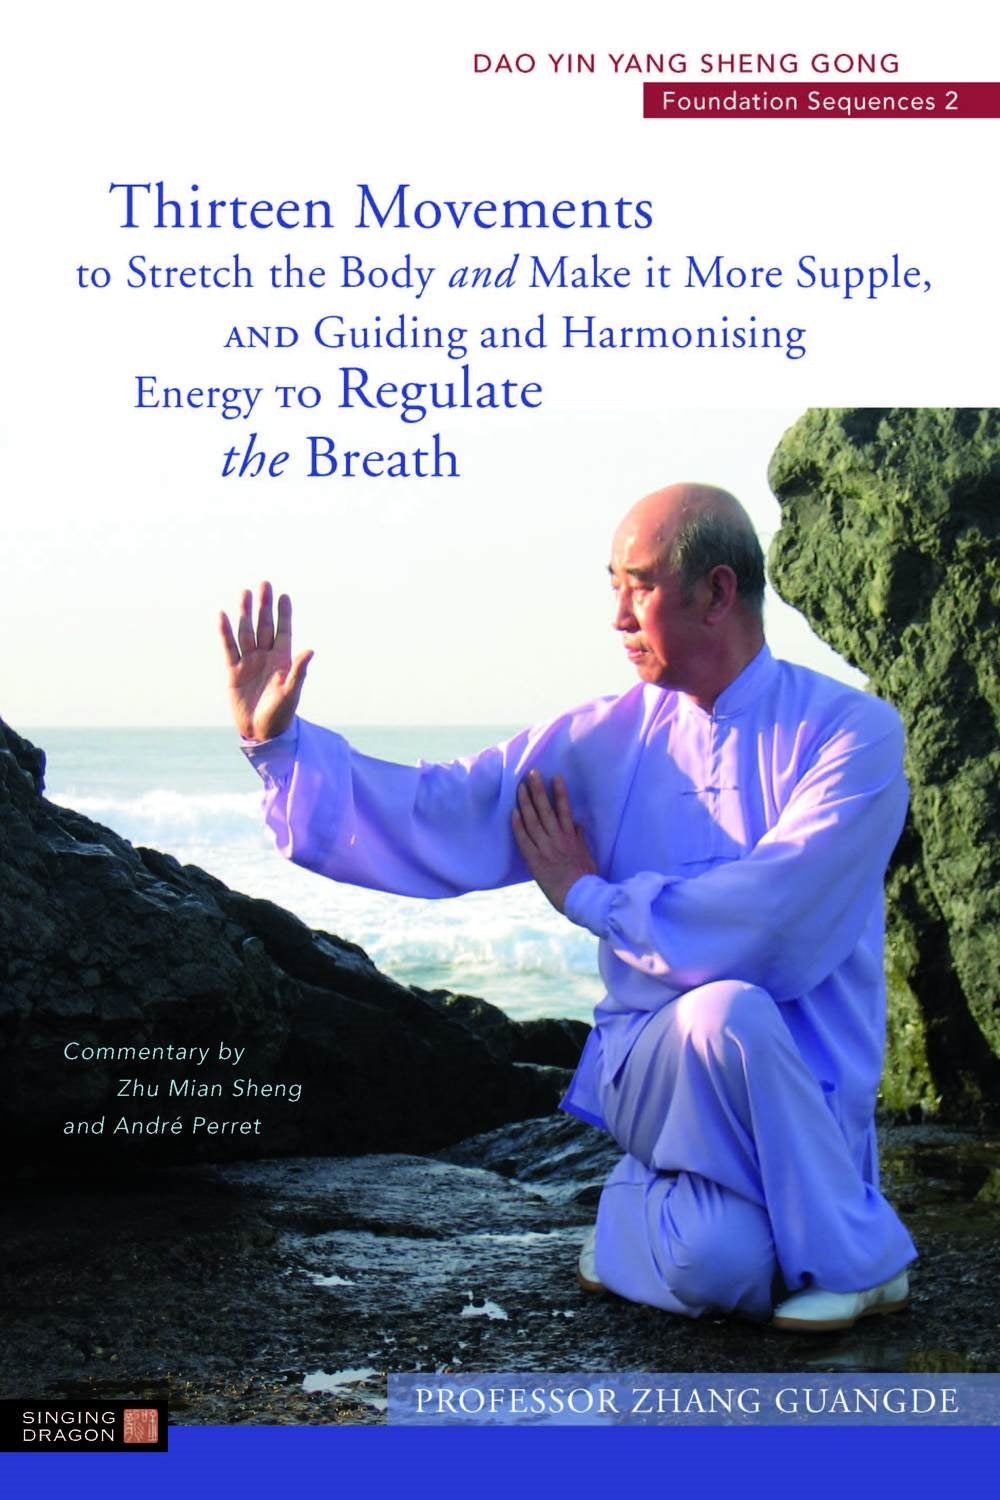 Thirteen Movements to Stretch the Body and Make it More Supple, and Guiding and Harmonising Energy to Regulate the Breath by Zhang Guangde